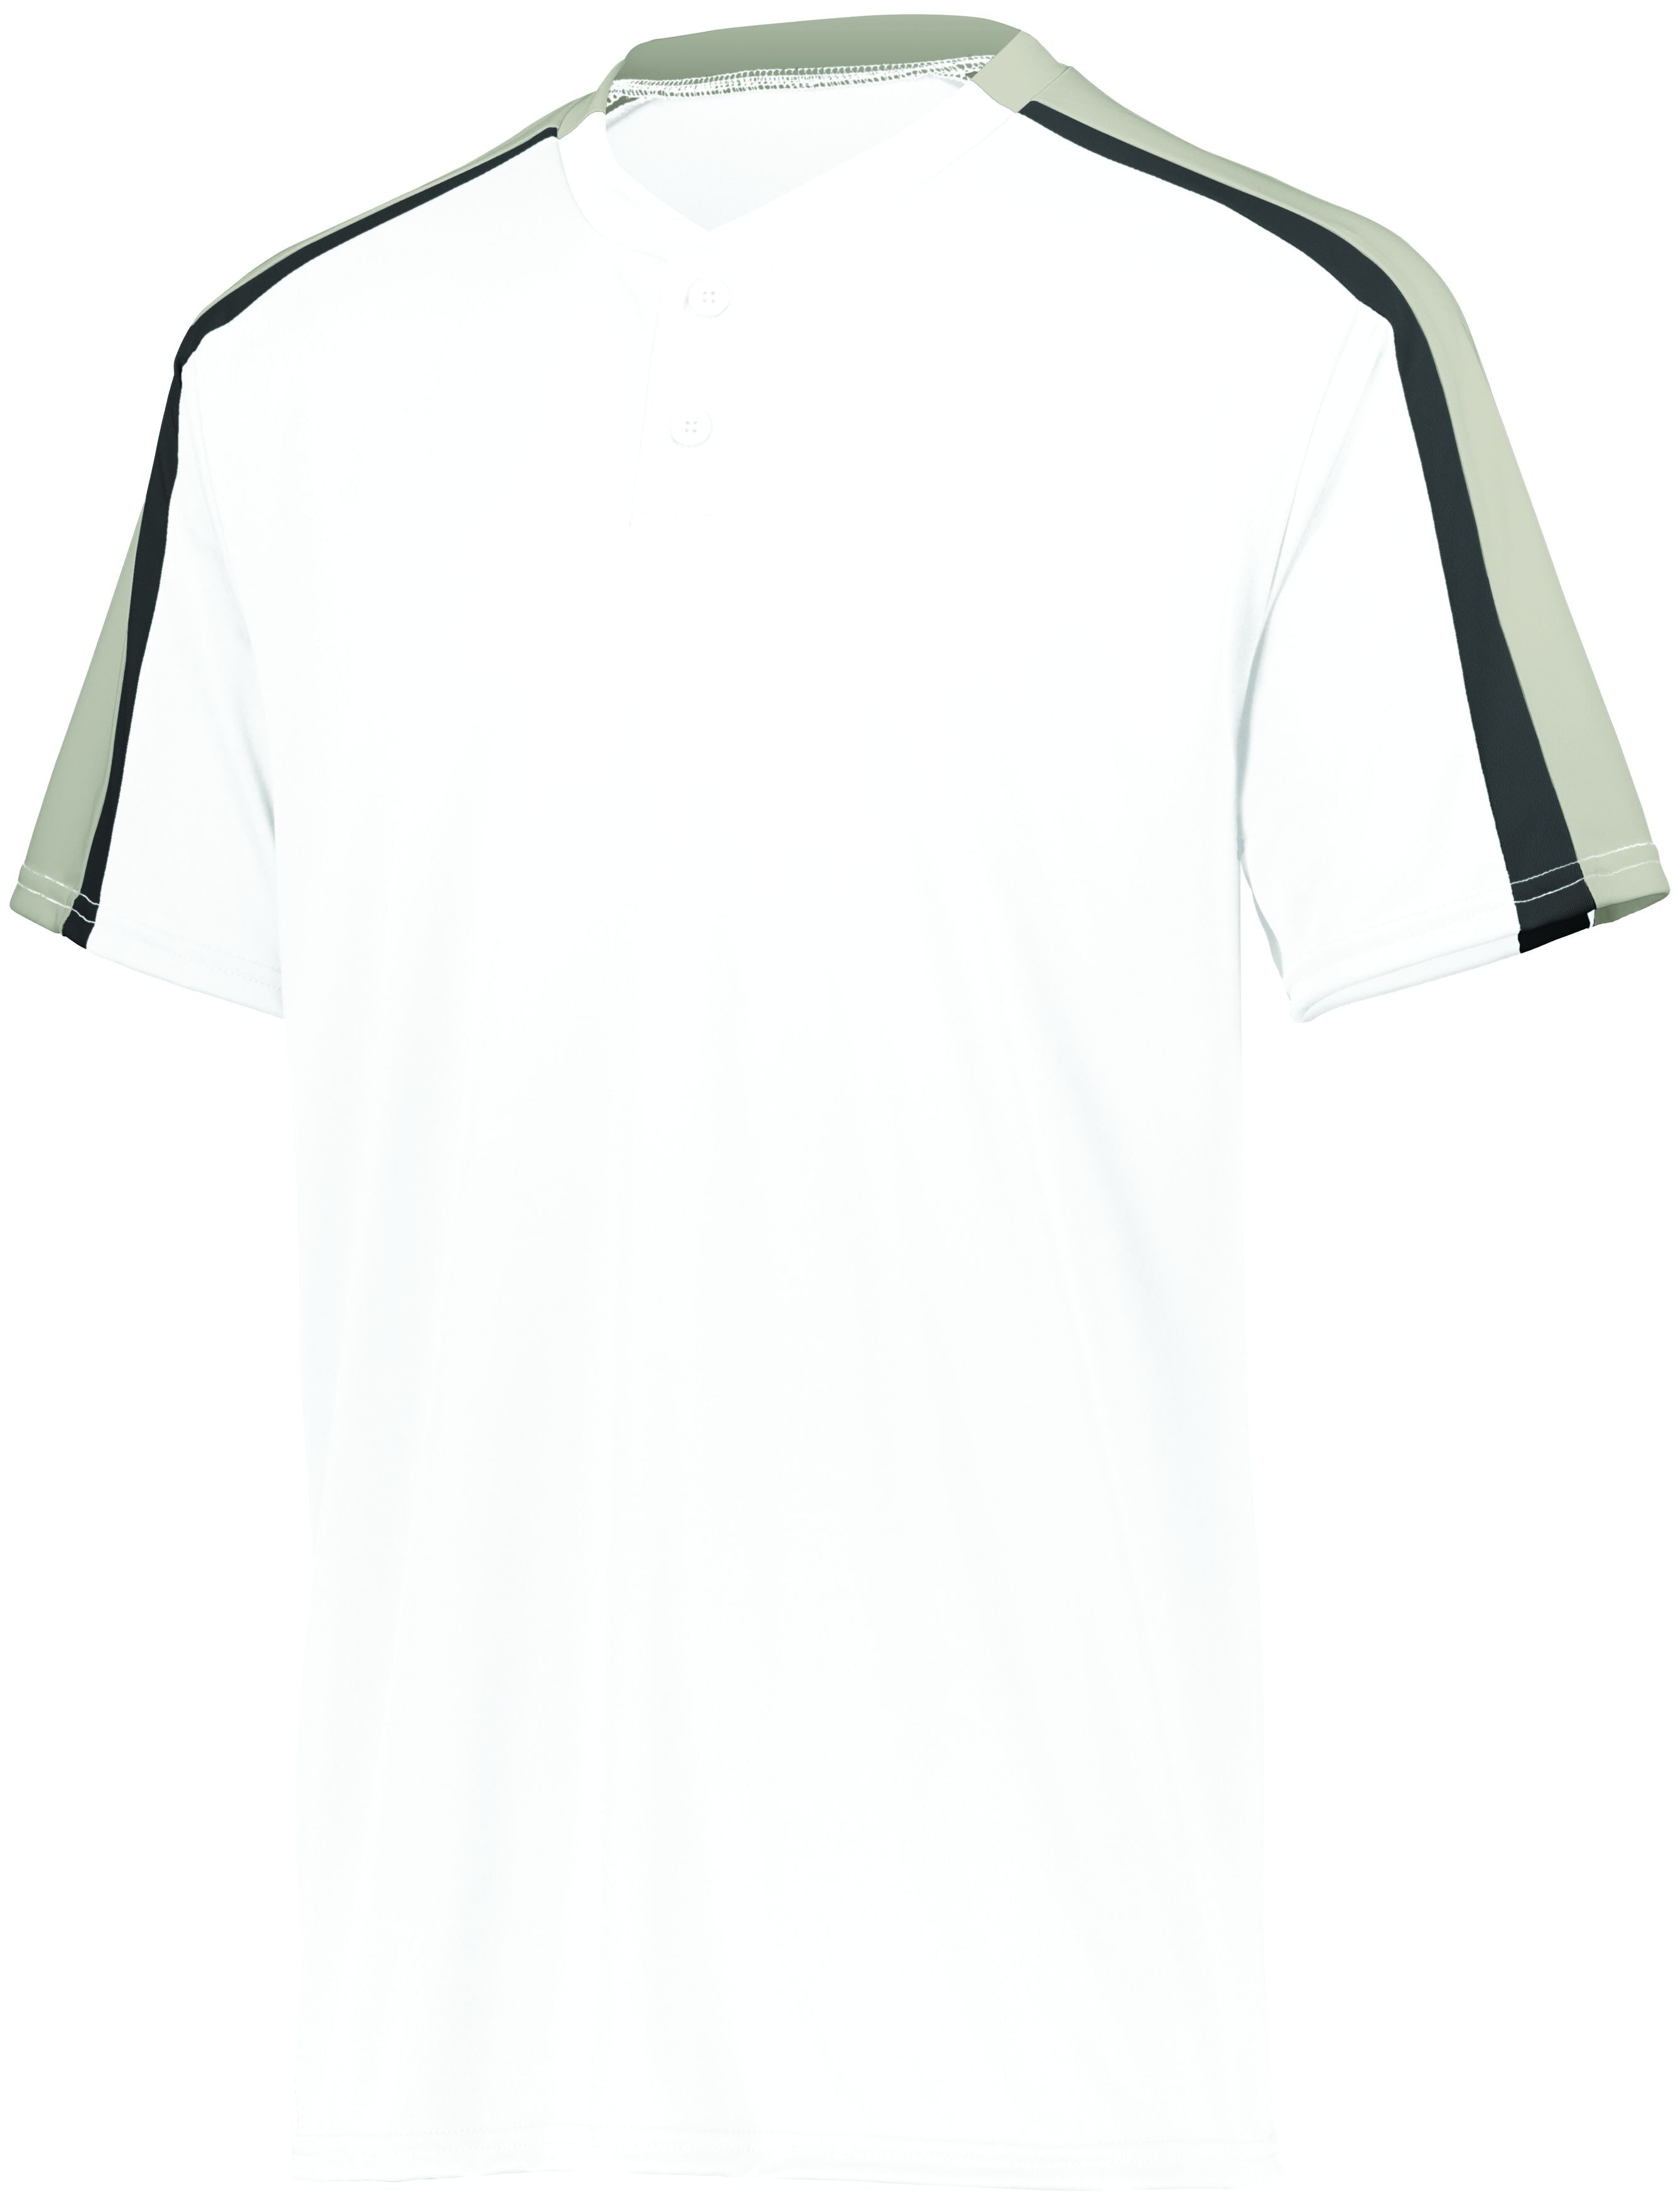 Augusta Sportswear Youth Power Plus Jersey 2.0 in White/Silver Grey/Black  -Part of the Youth, Youth-Jersey, Augusta-Products, Baseball, Shirts, All-Sports, All-Sports-1 product lines at KanaleyCreations.com